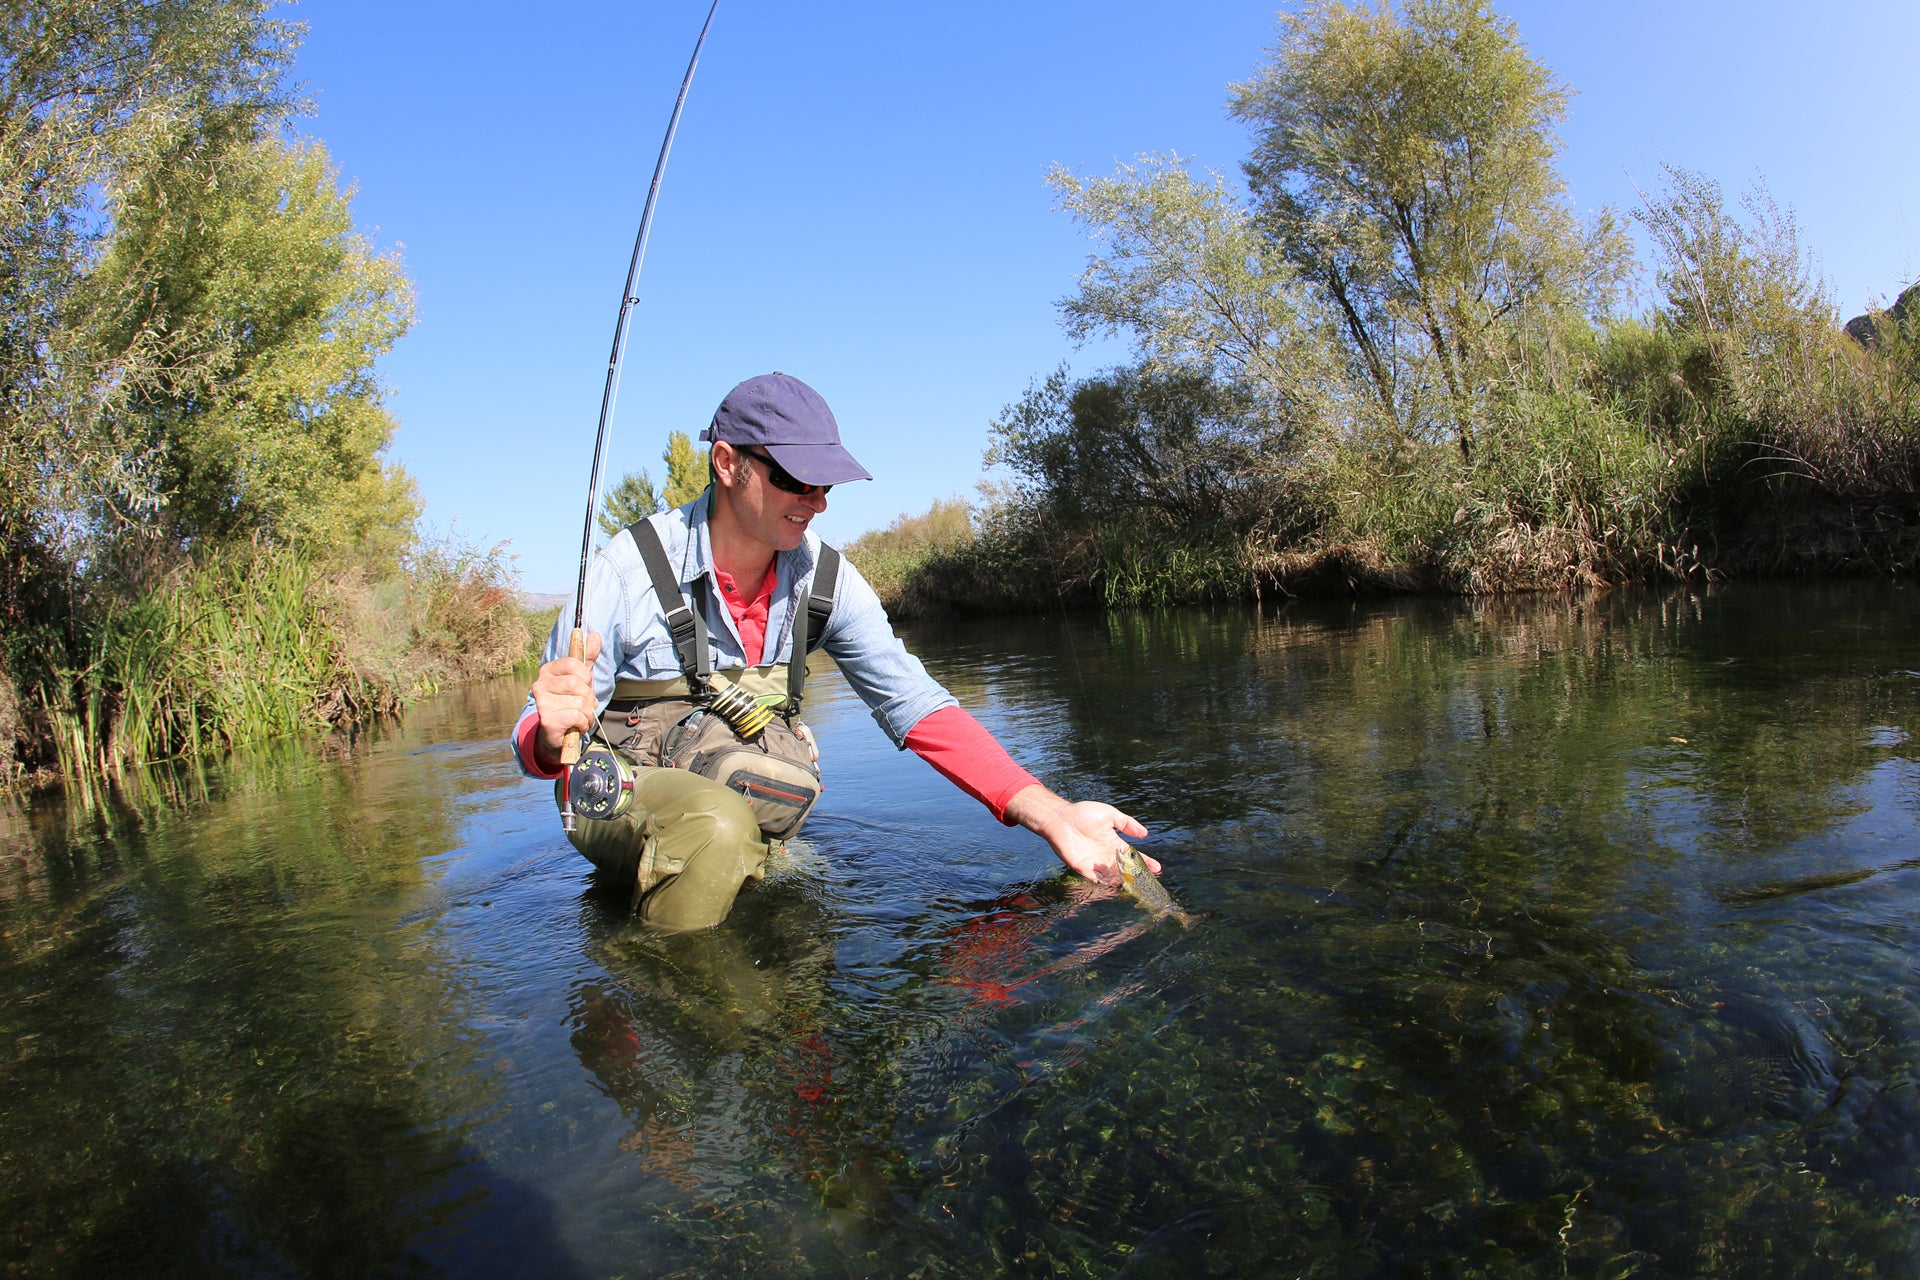 Five Classic Dry Flies Every Angler Needs to Have in Their Fly Box